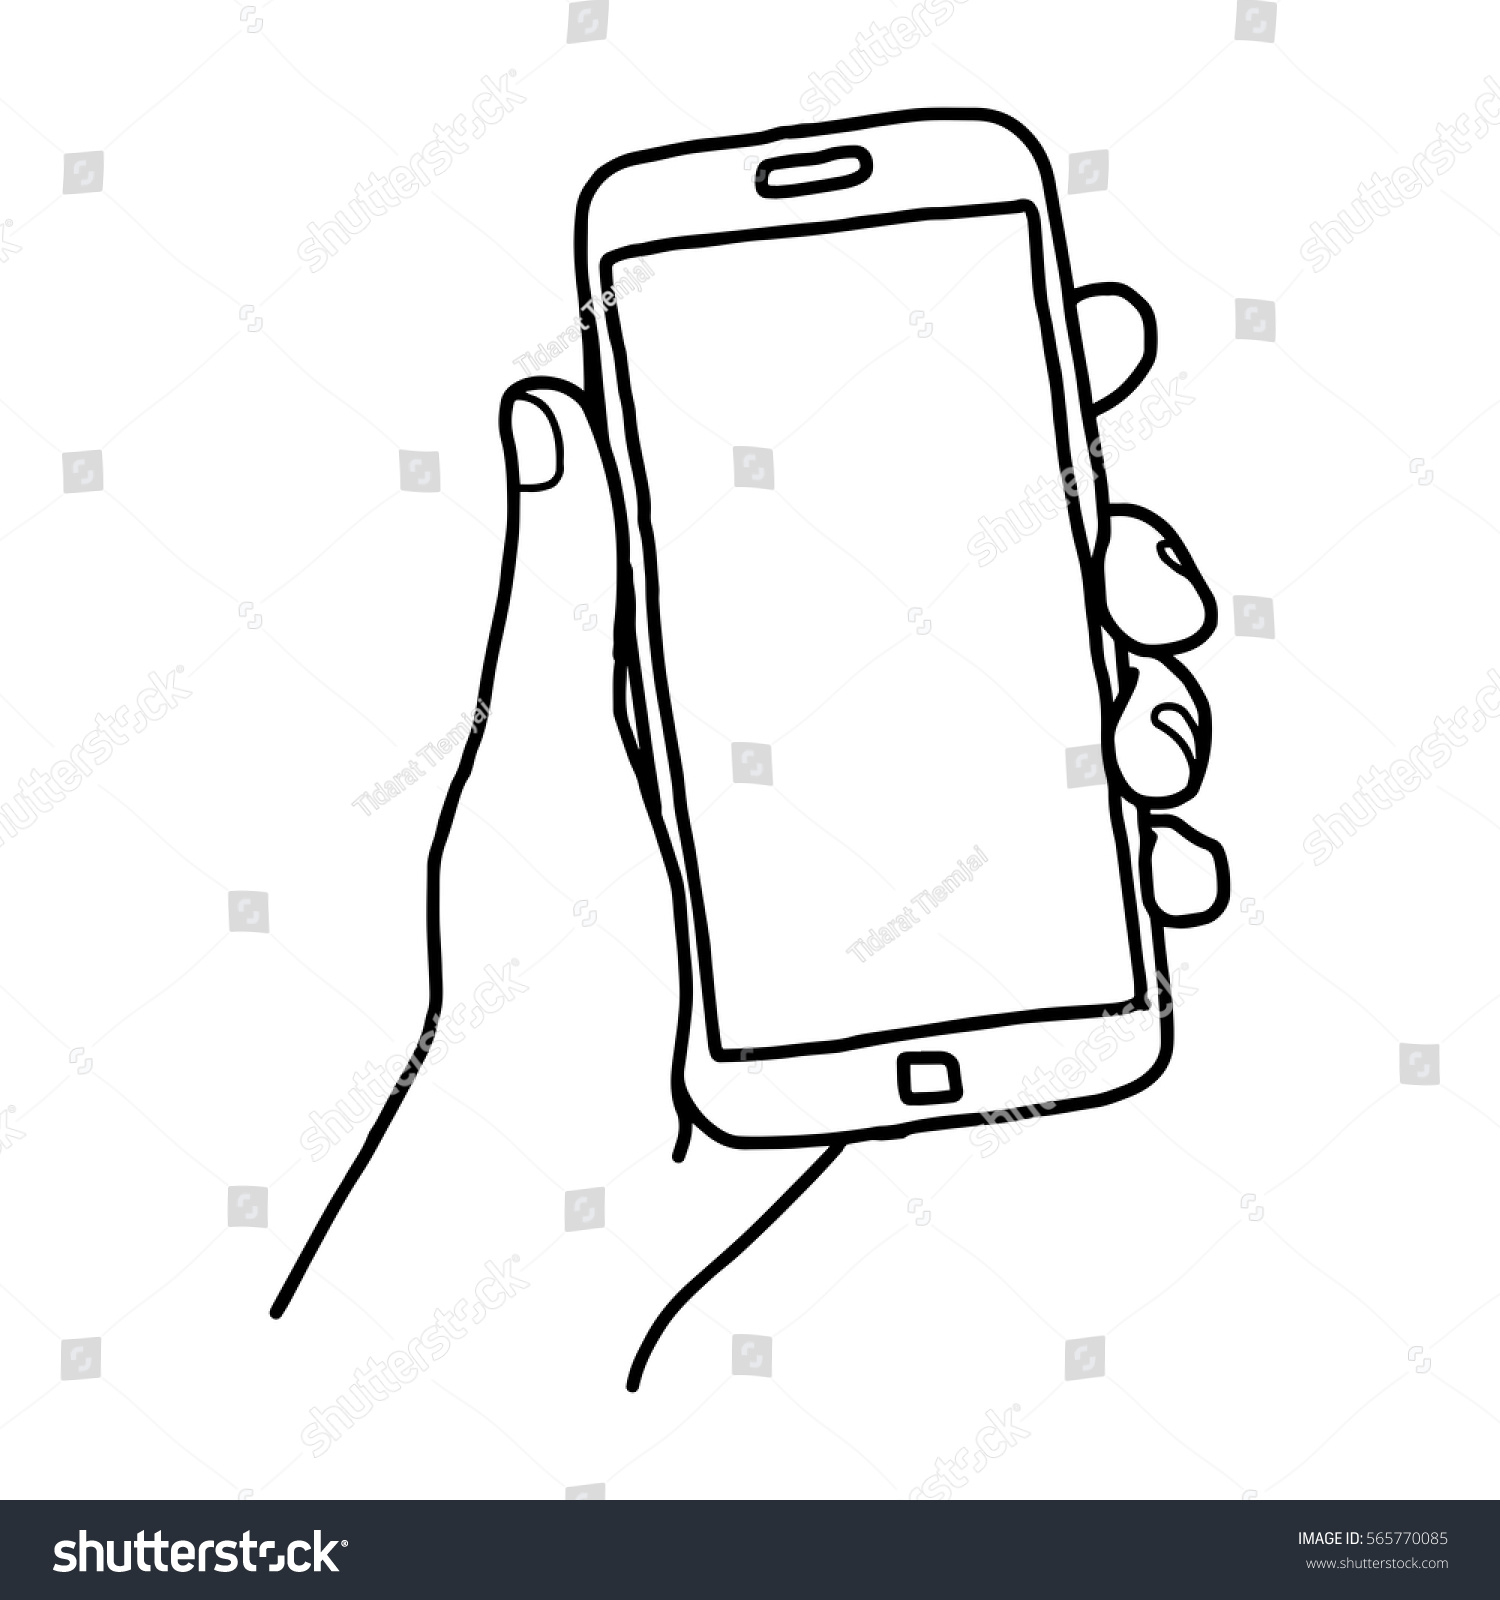 138,424 Mobile hand drawing Images, Stock Photos & Vectors | Shutterstock